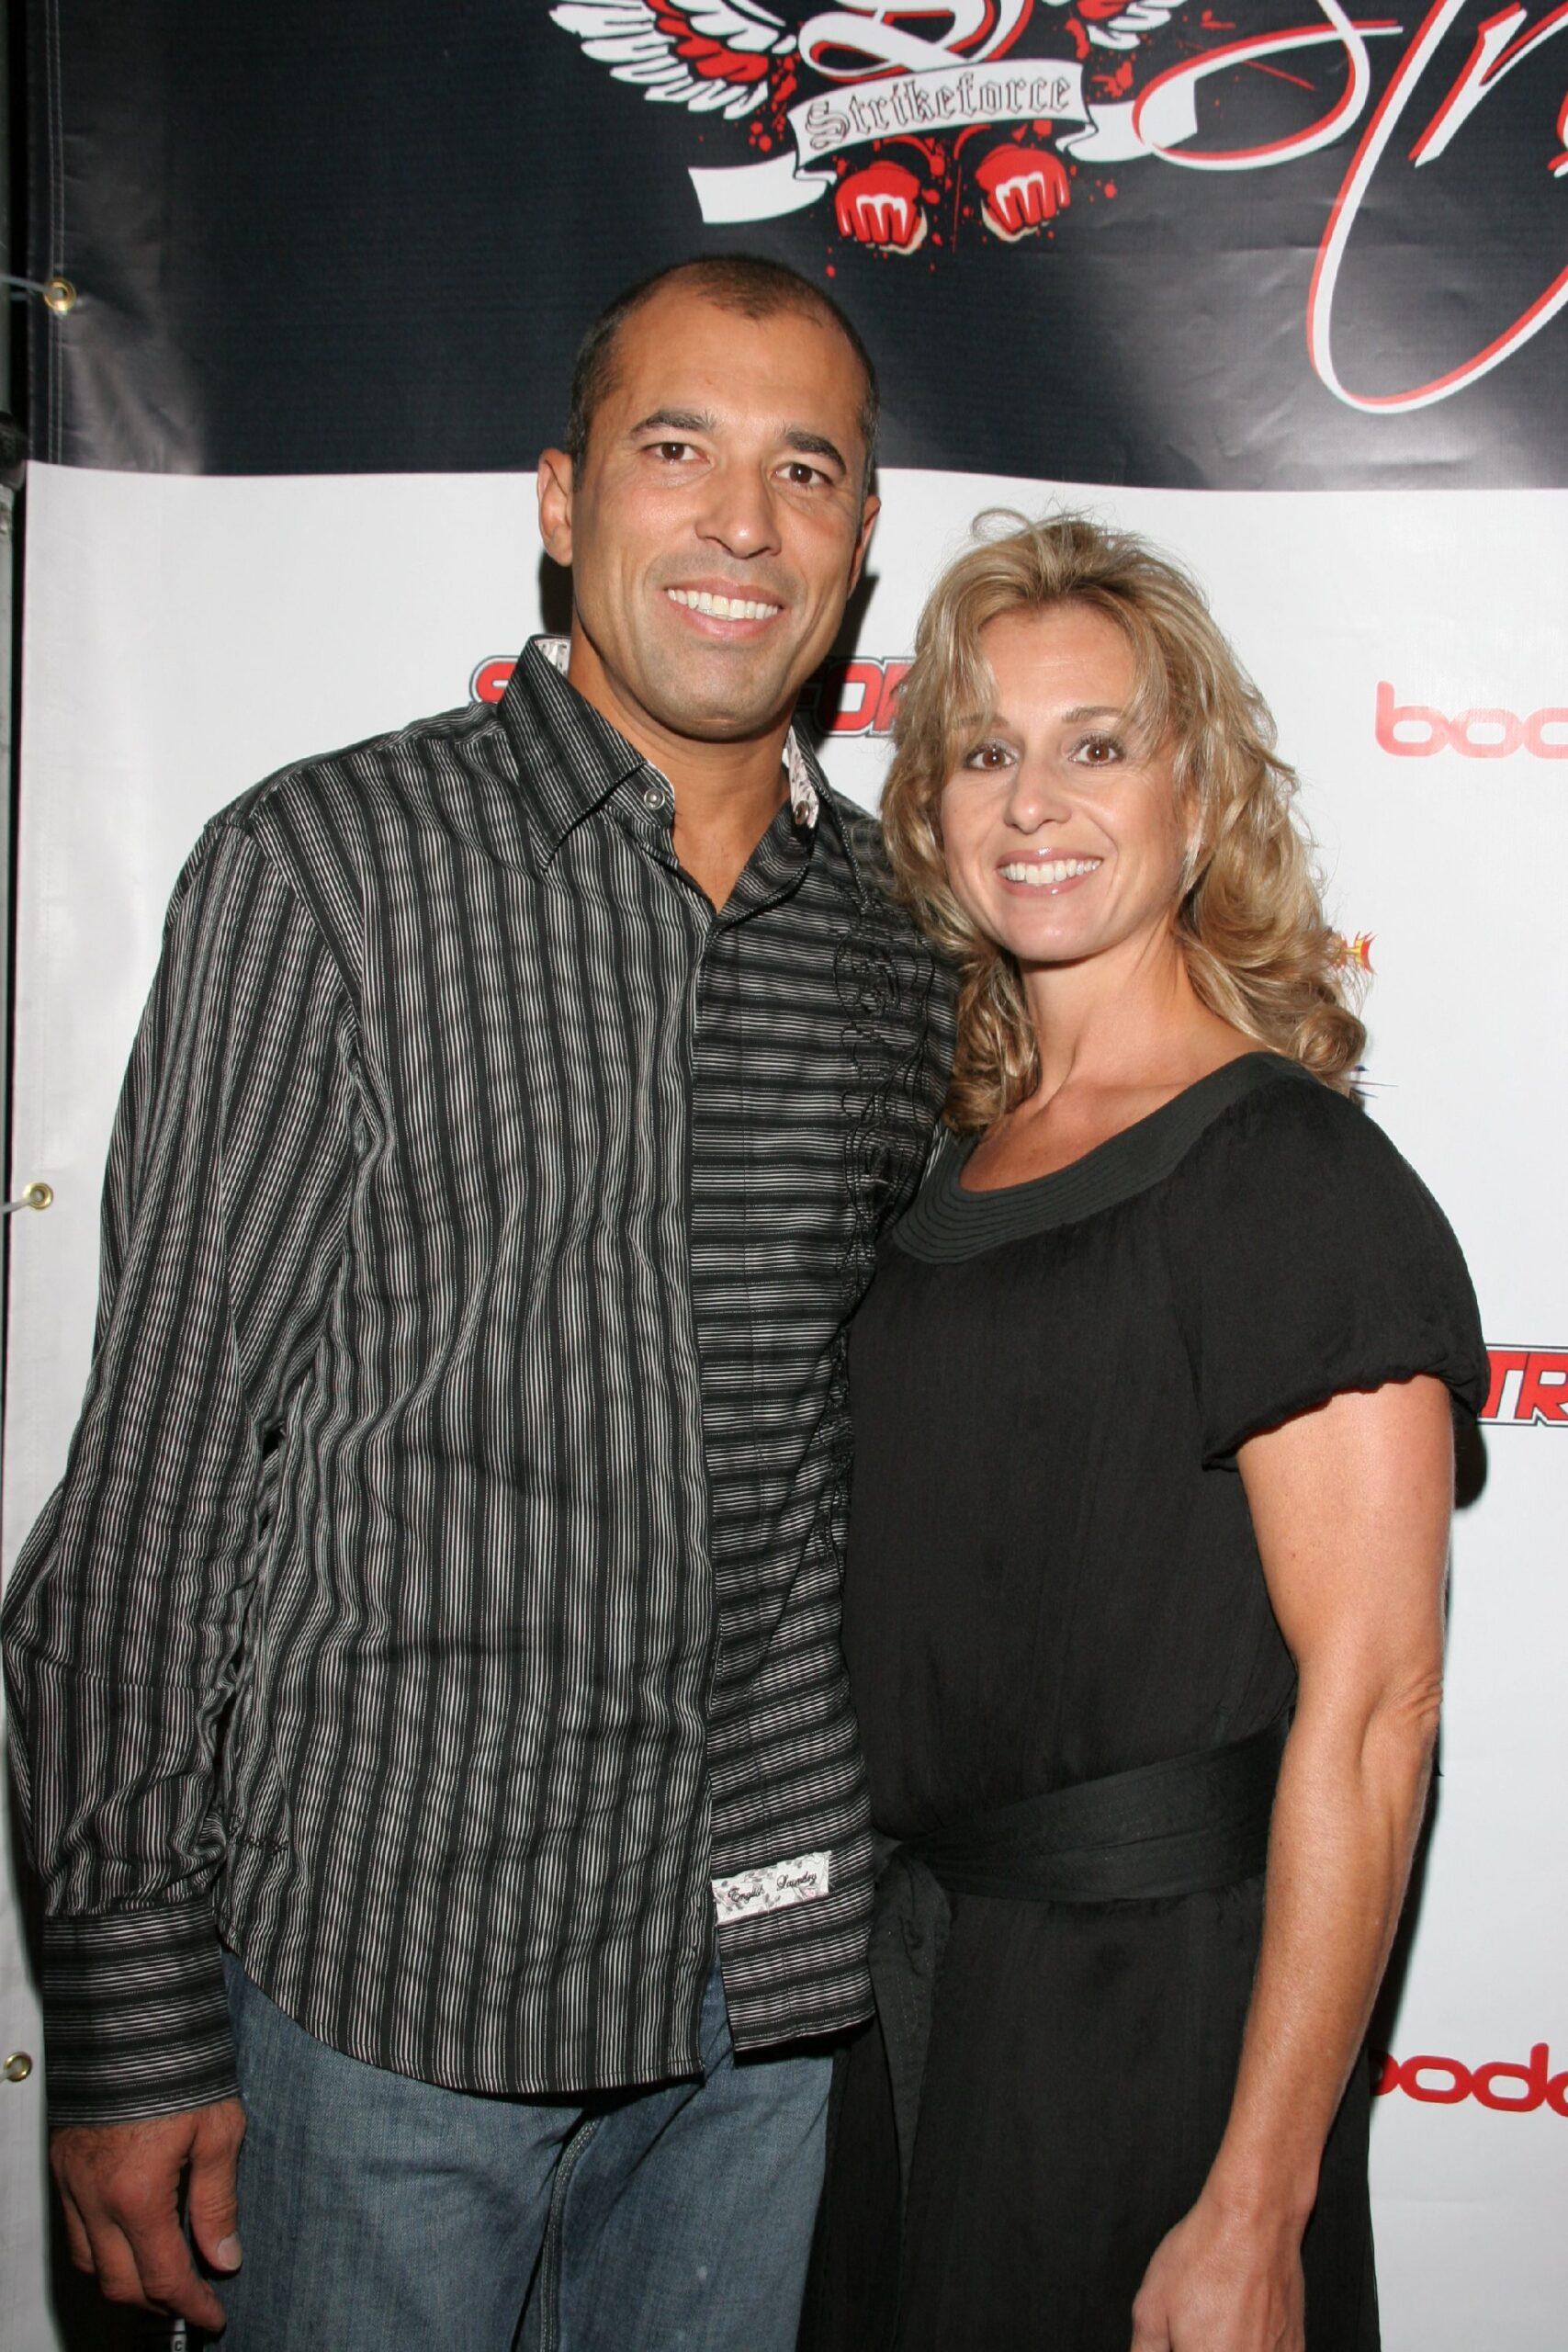 UFC Legend Royce Gracie Awarded His Life Story Rights In Divorce Settlement